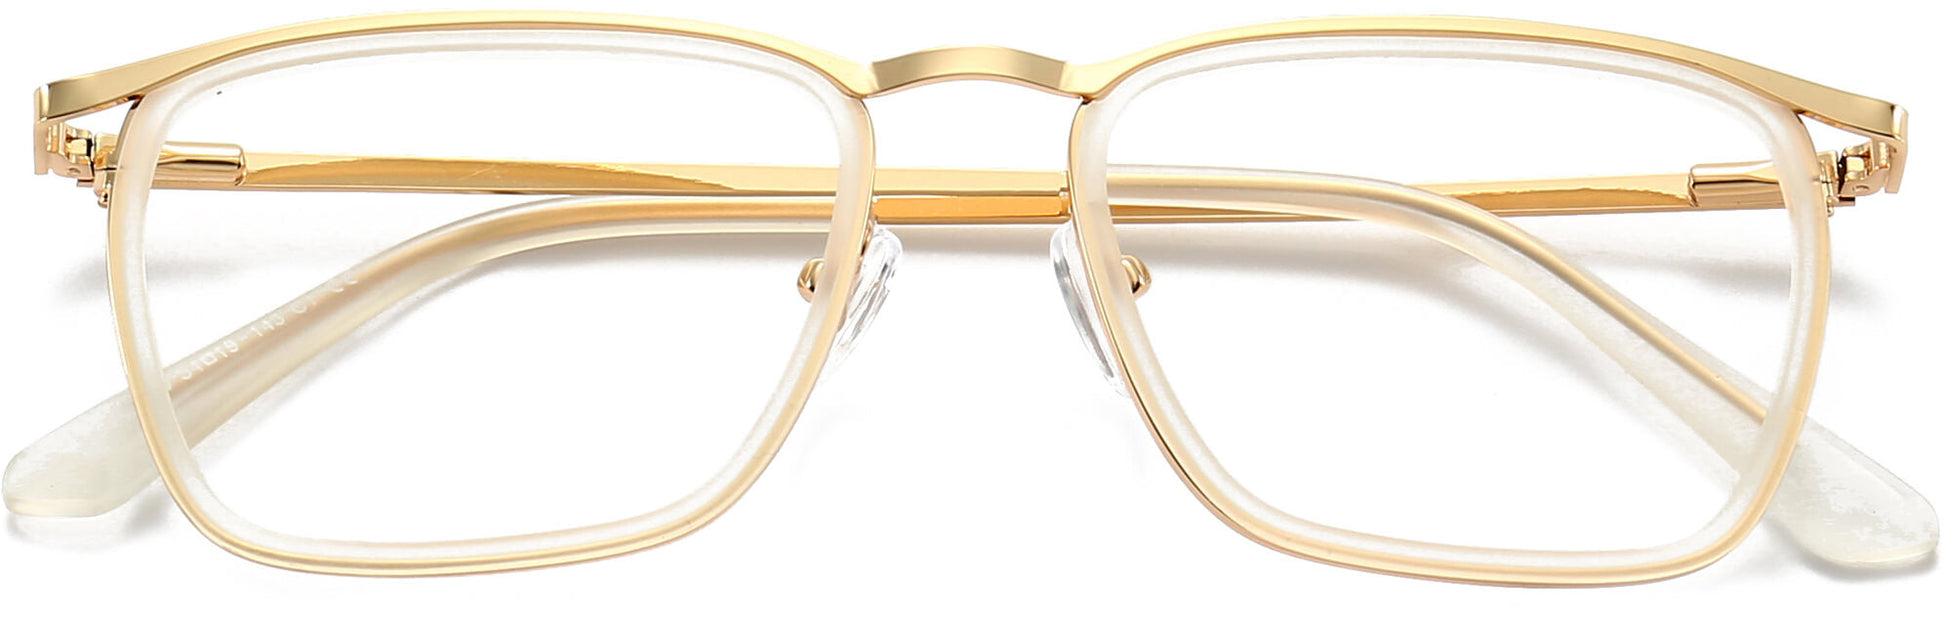 Kamiyah Square Clear Eyeglasses from ANRRI, Closed View